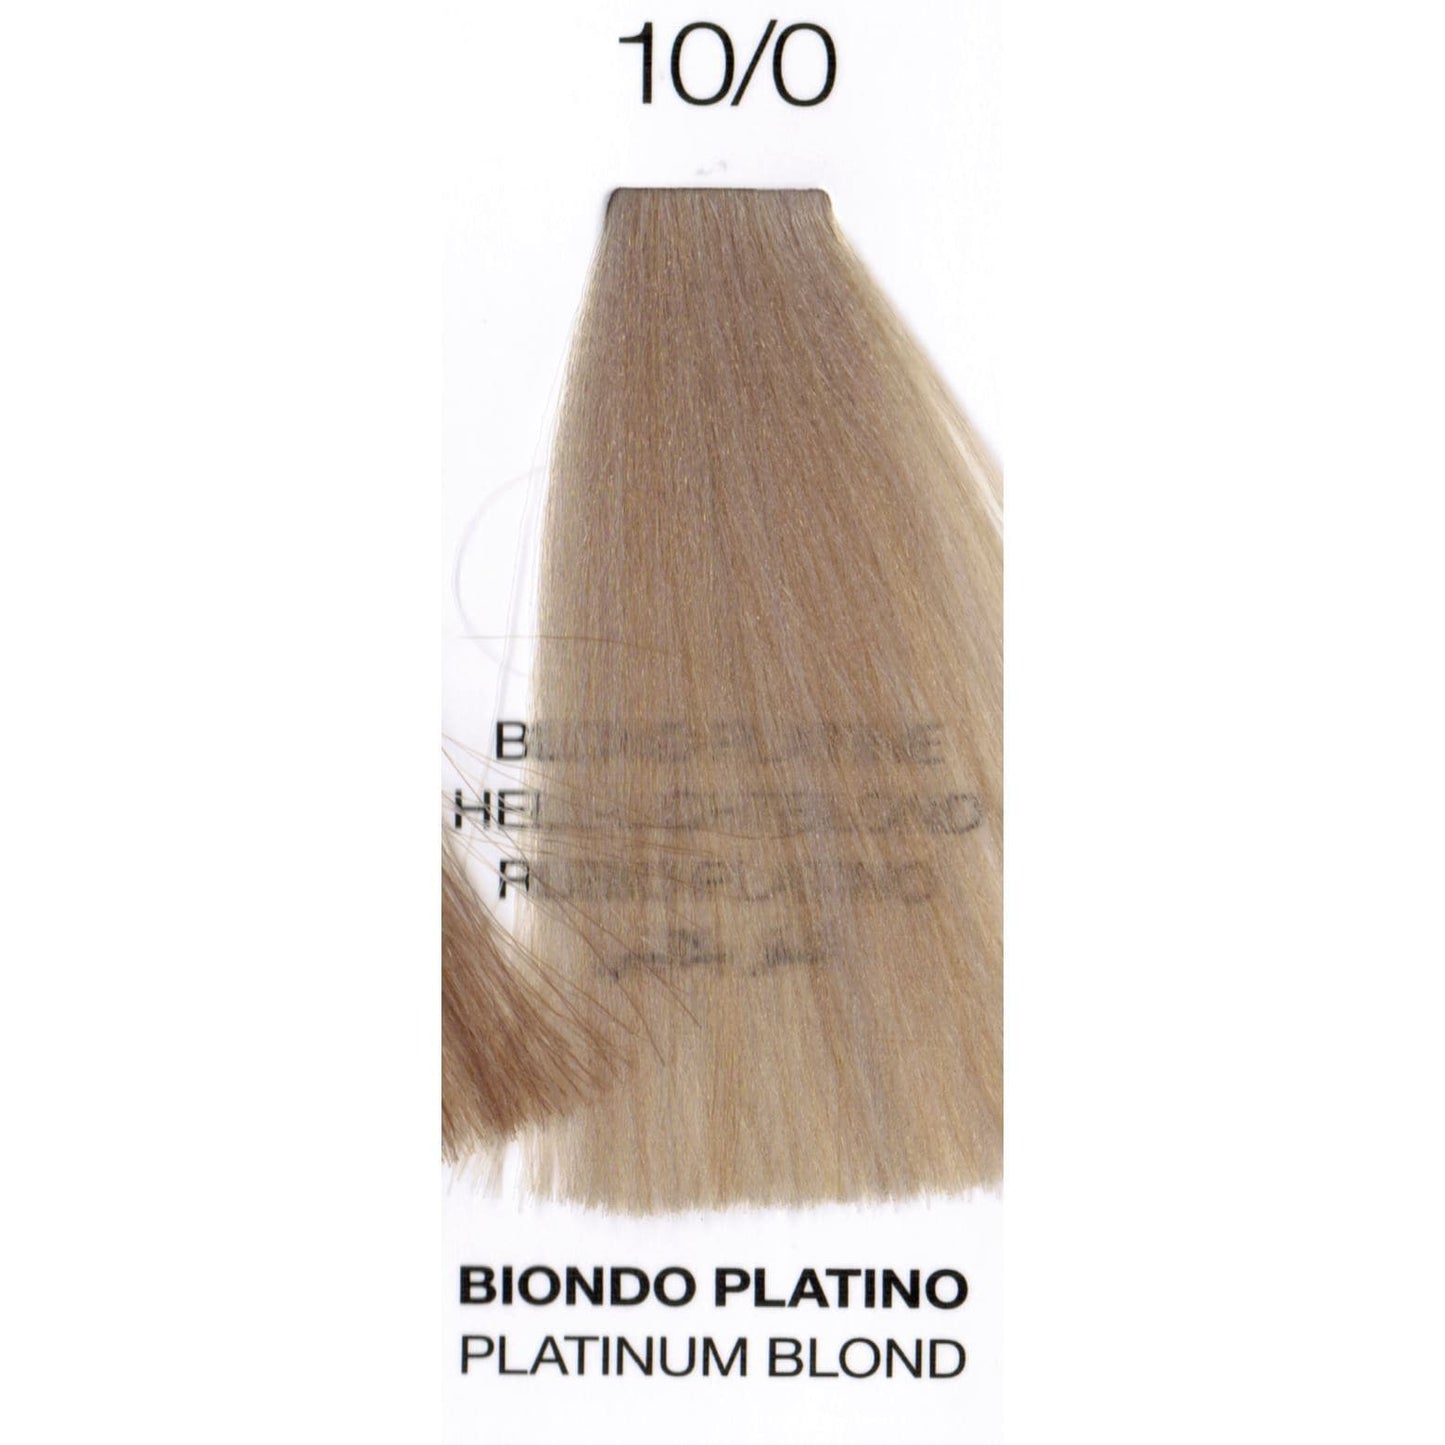 10/0 Platinum Blonde | Purity | Ammonia-Free Permanent Hair Color HAIR COLOR OYSTER 